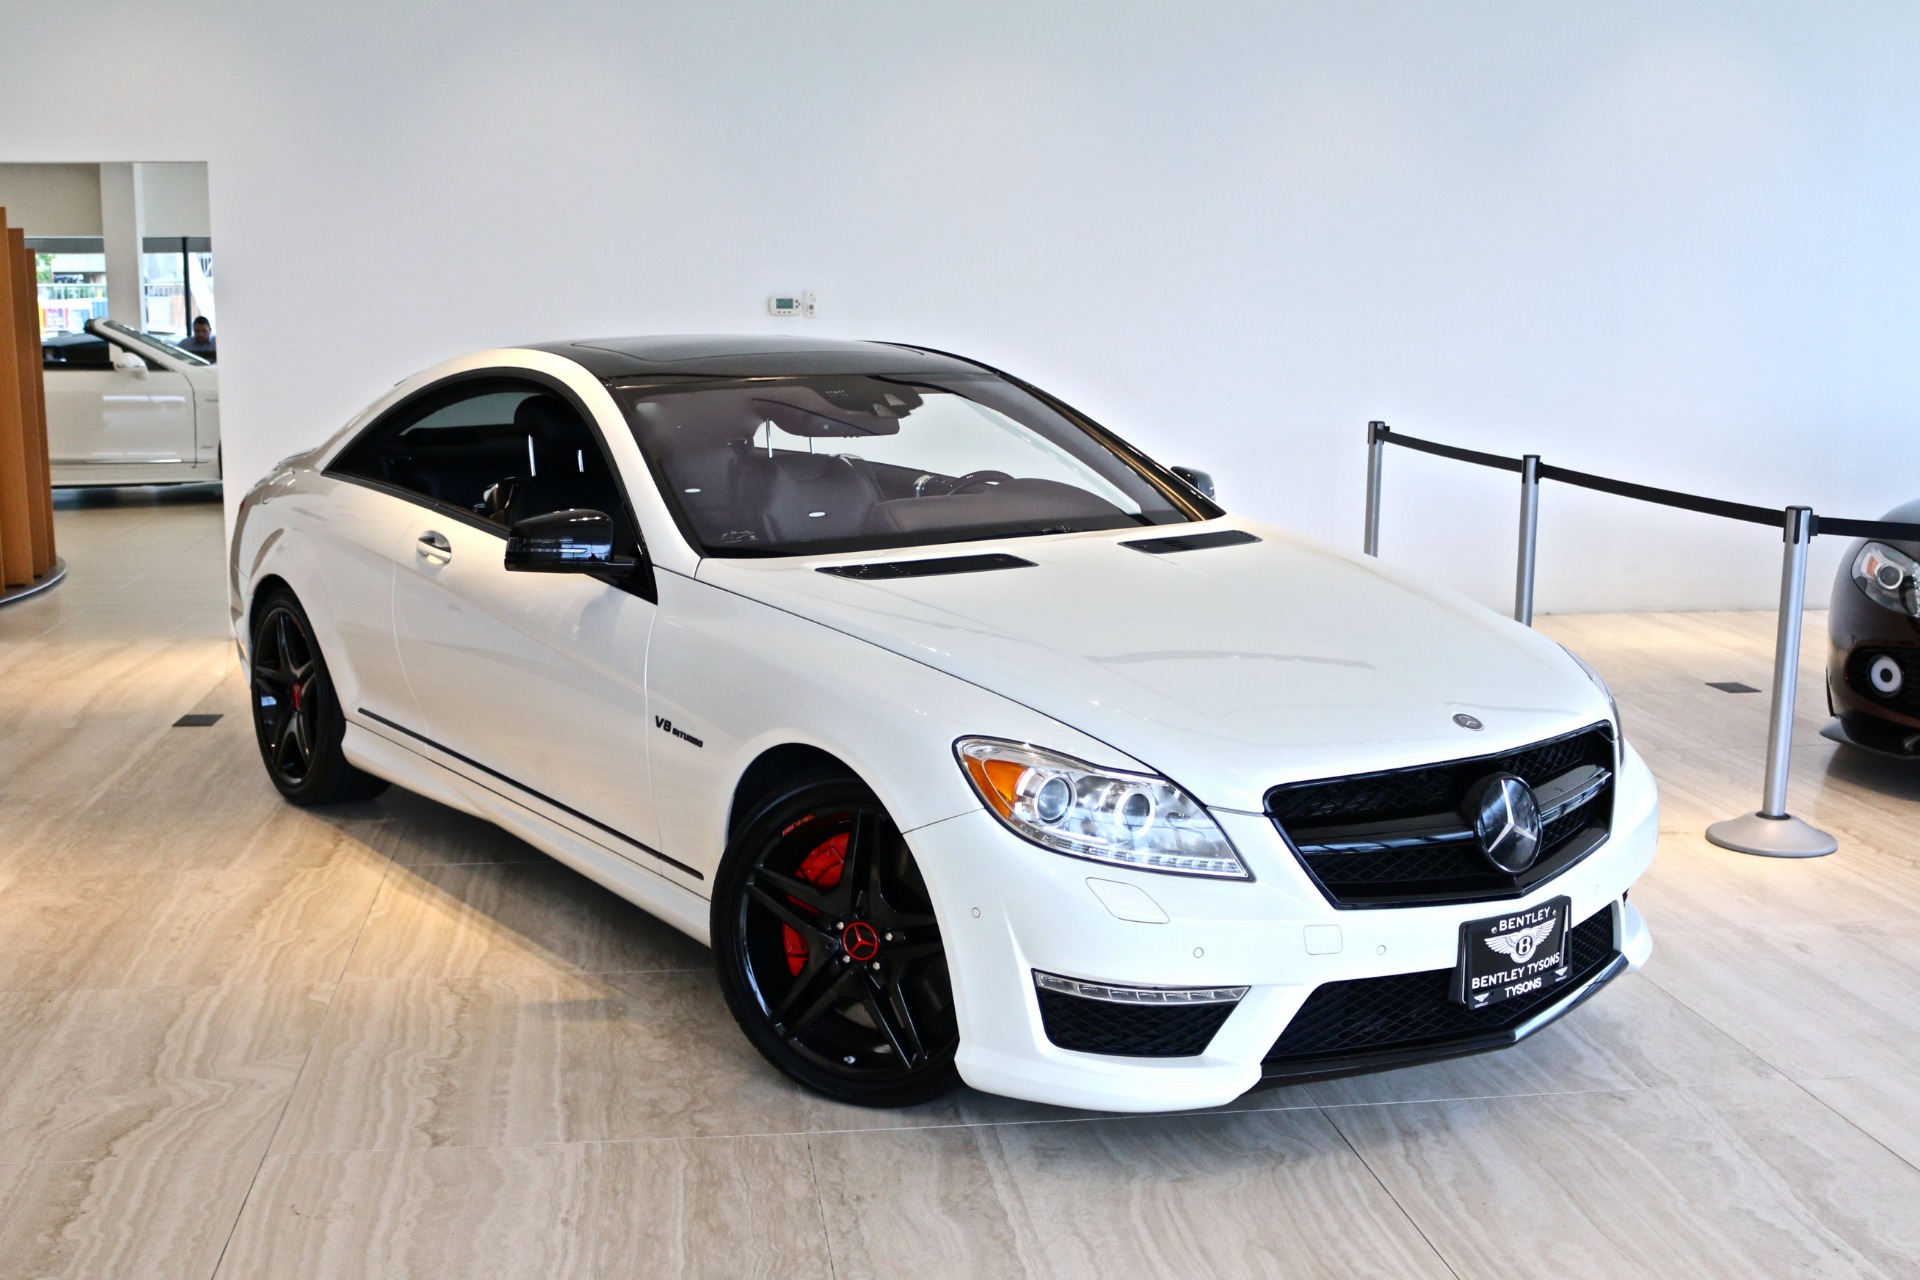 2013 Mercedes-Benz CL-Class CL 63 AMG Stock # 7NJ03262B for sale near